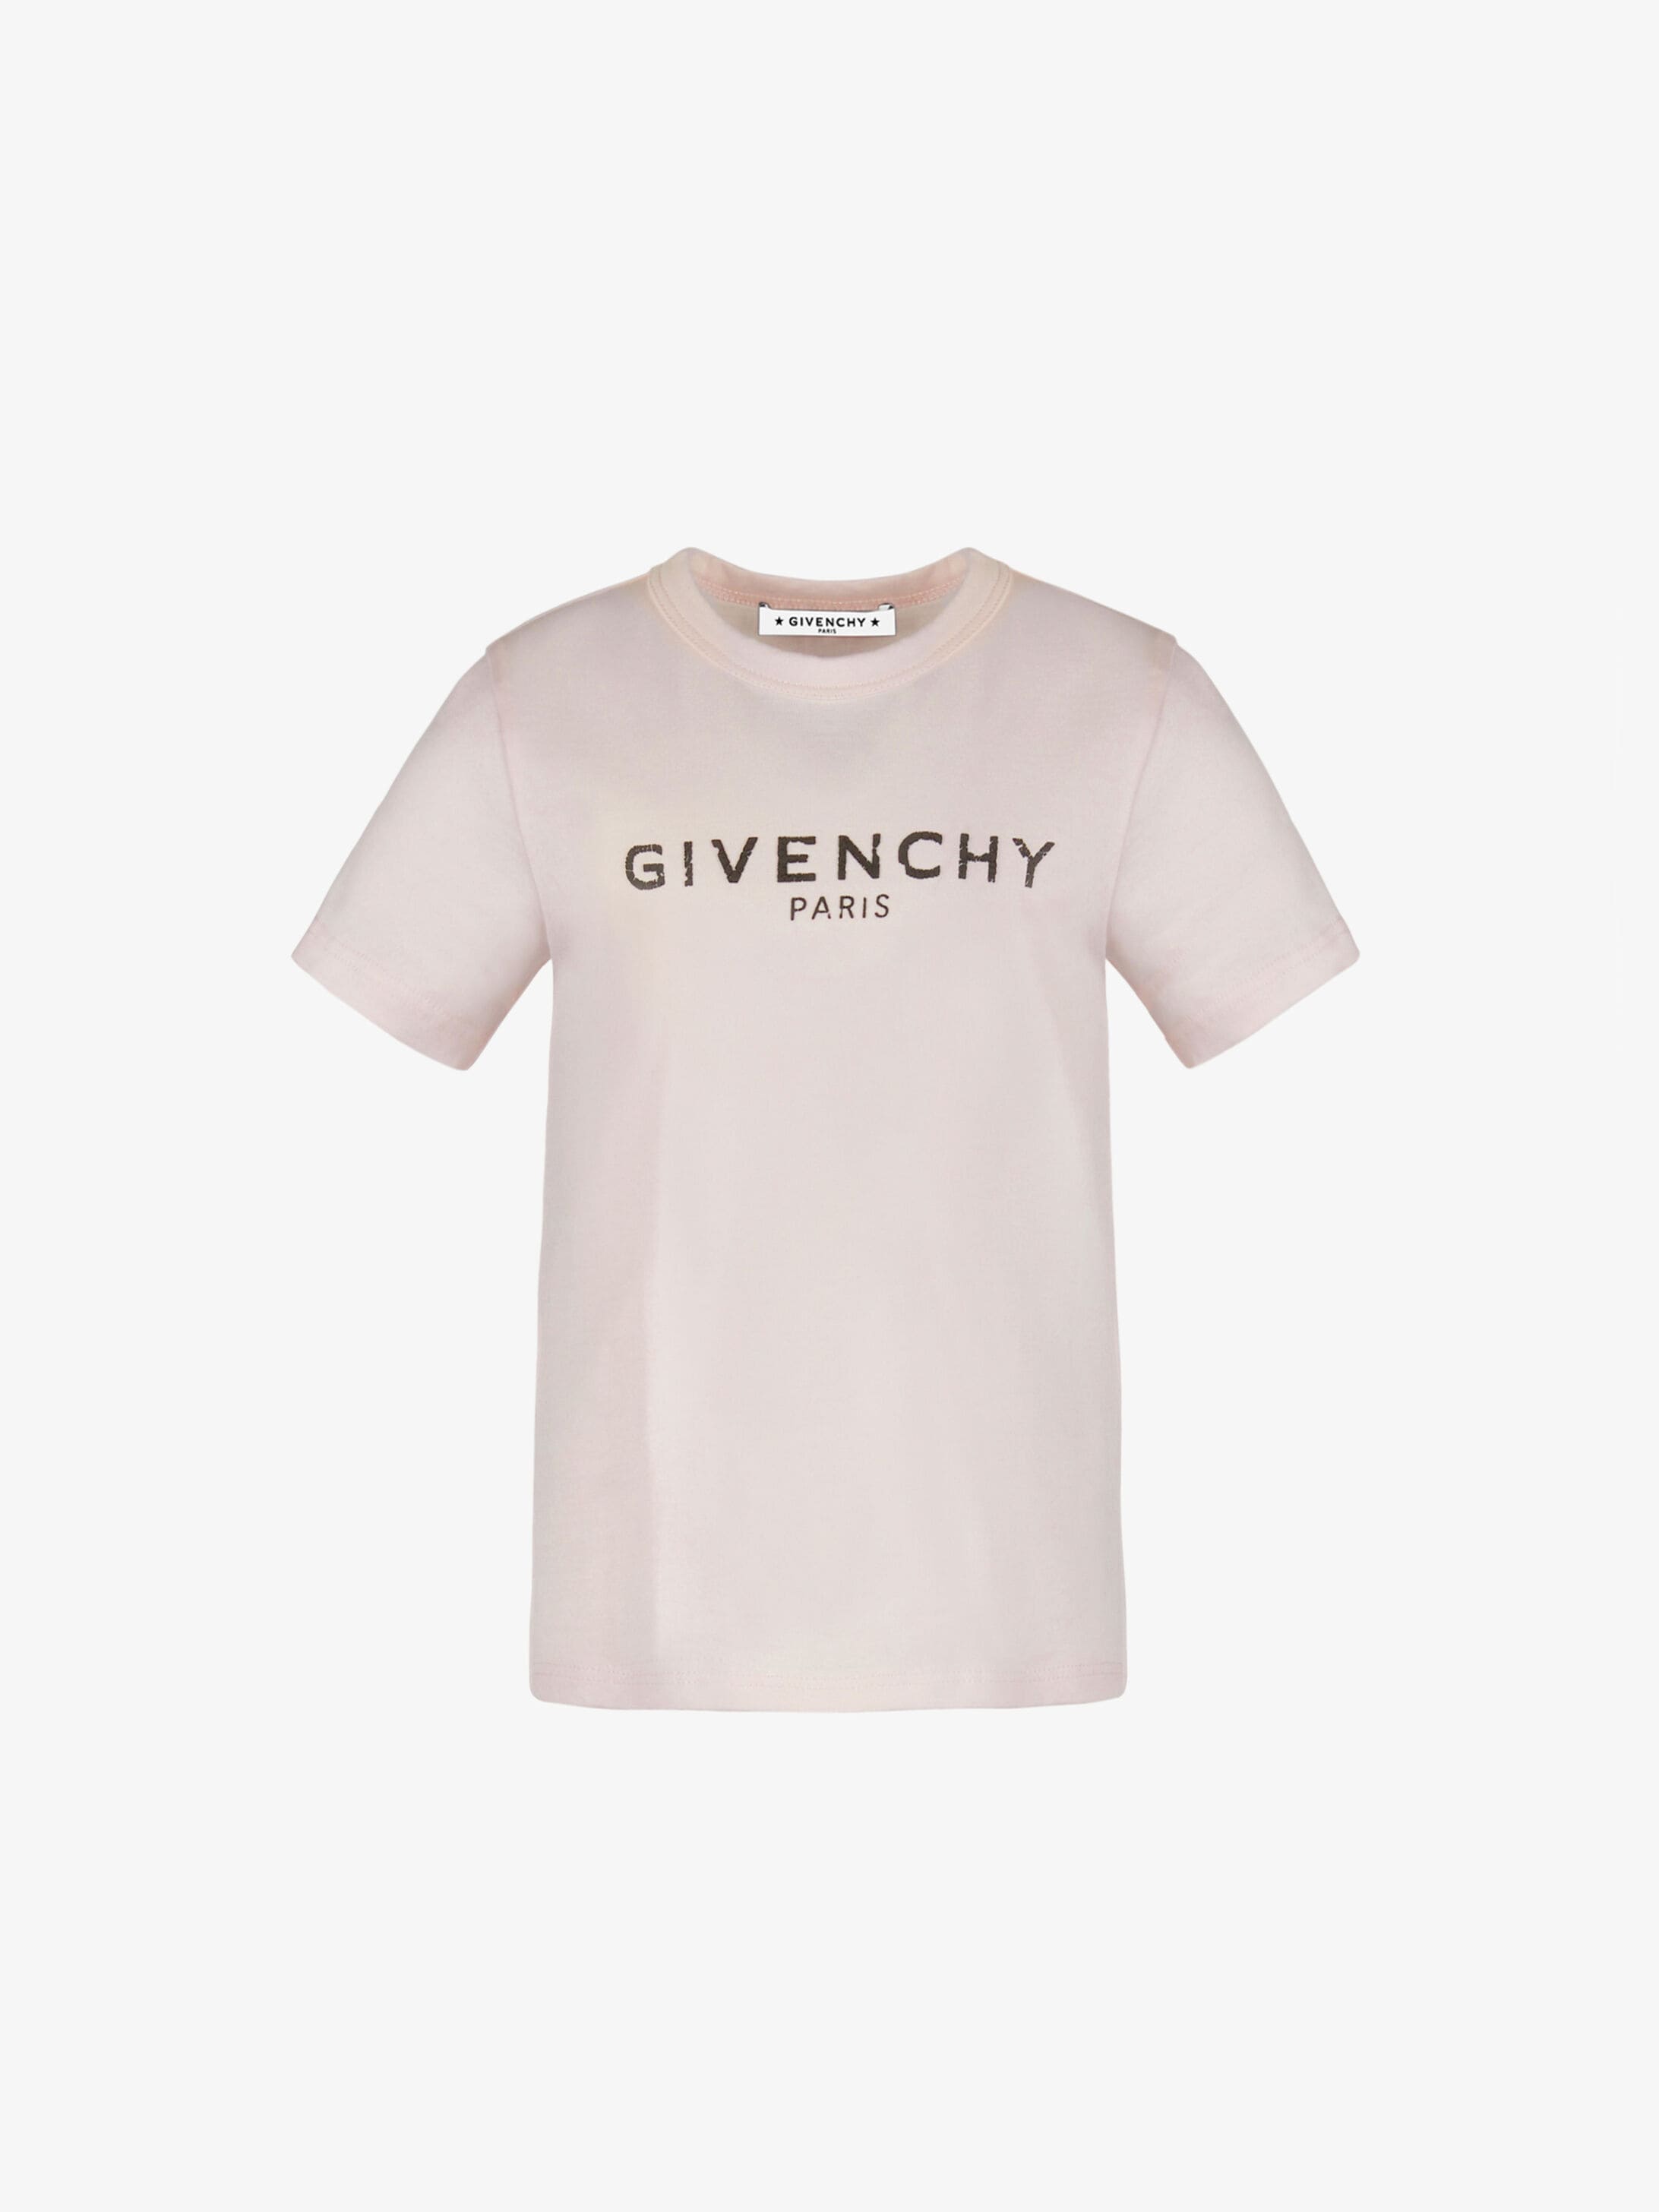 GIVENCHY PARIS t-shirt in cotton jersey 